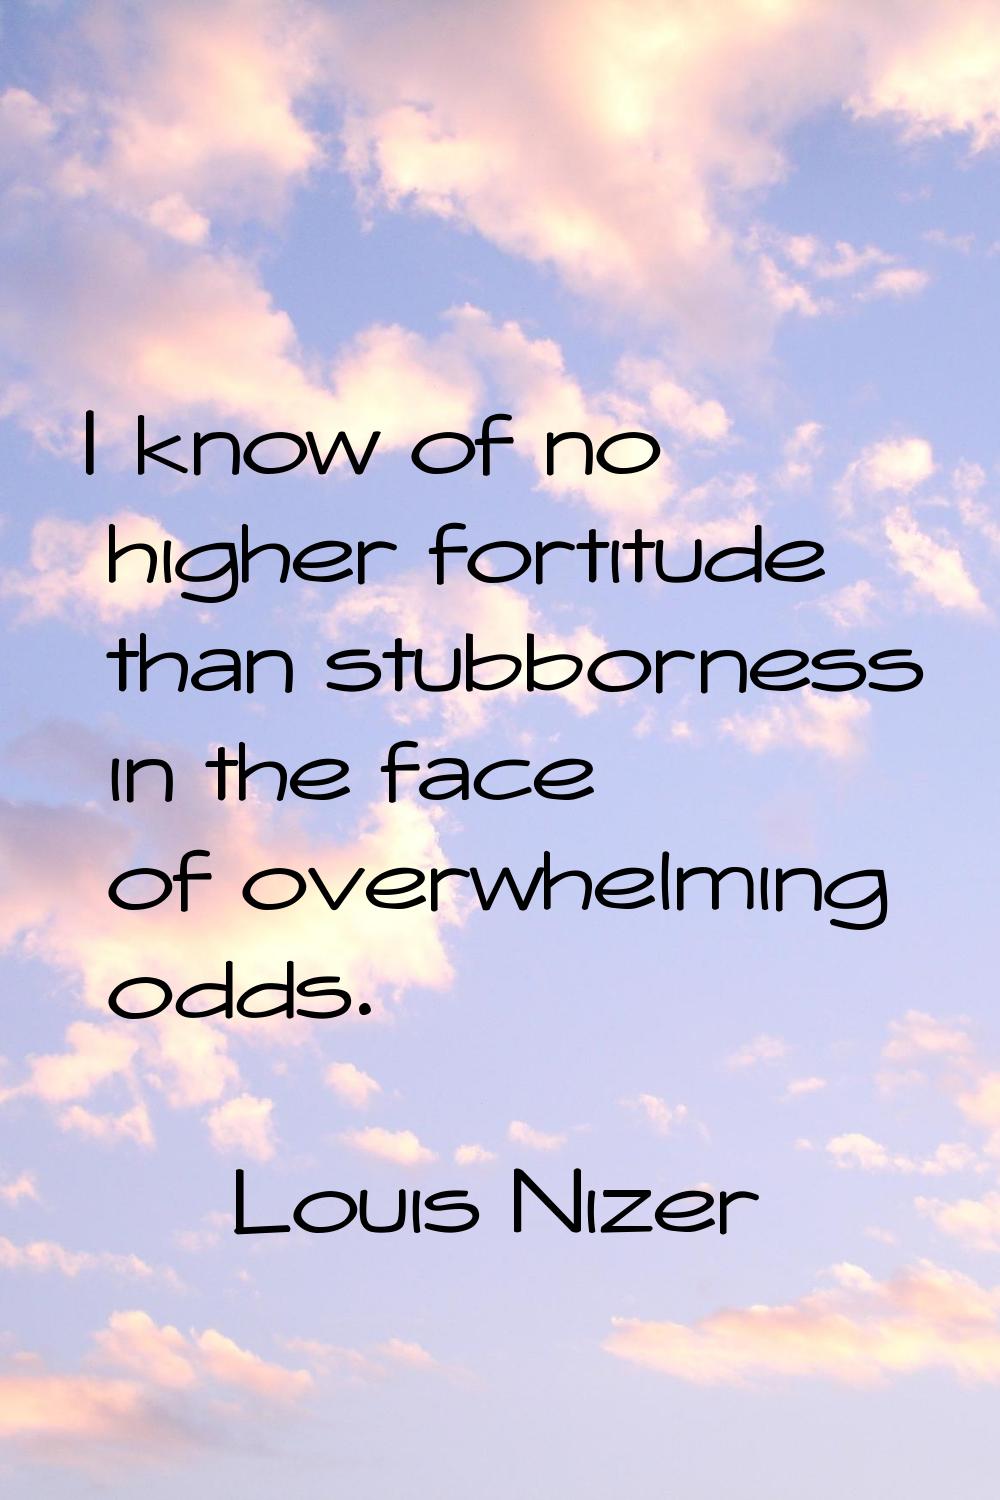 I know of no higher fortitude than stubborness in the face of overwhelming odds.